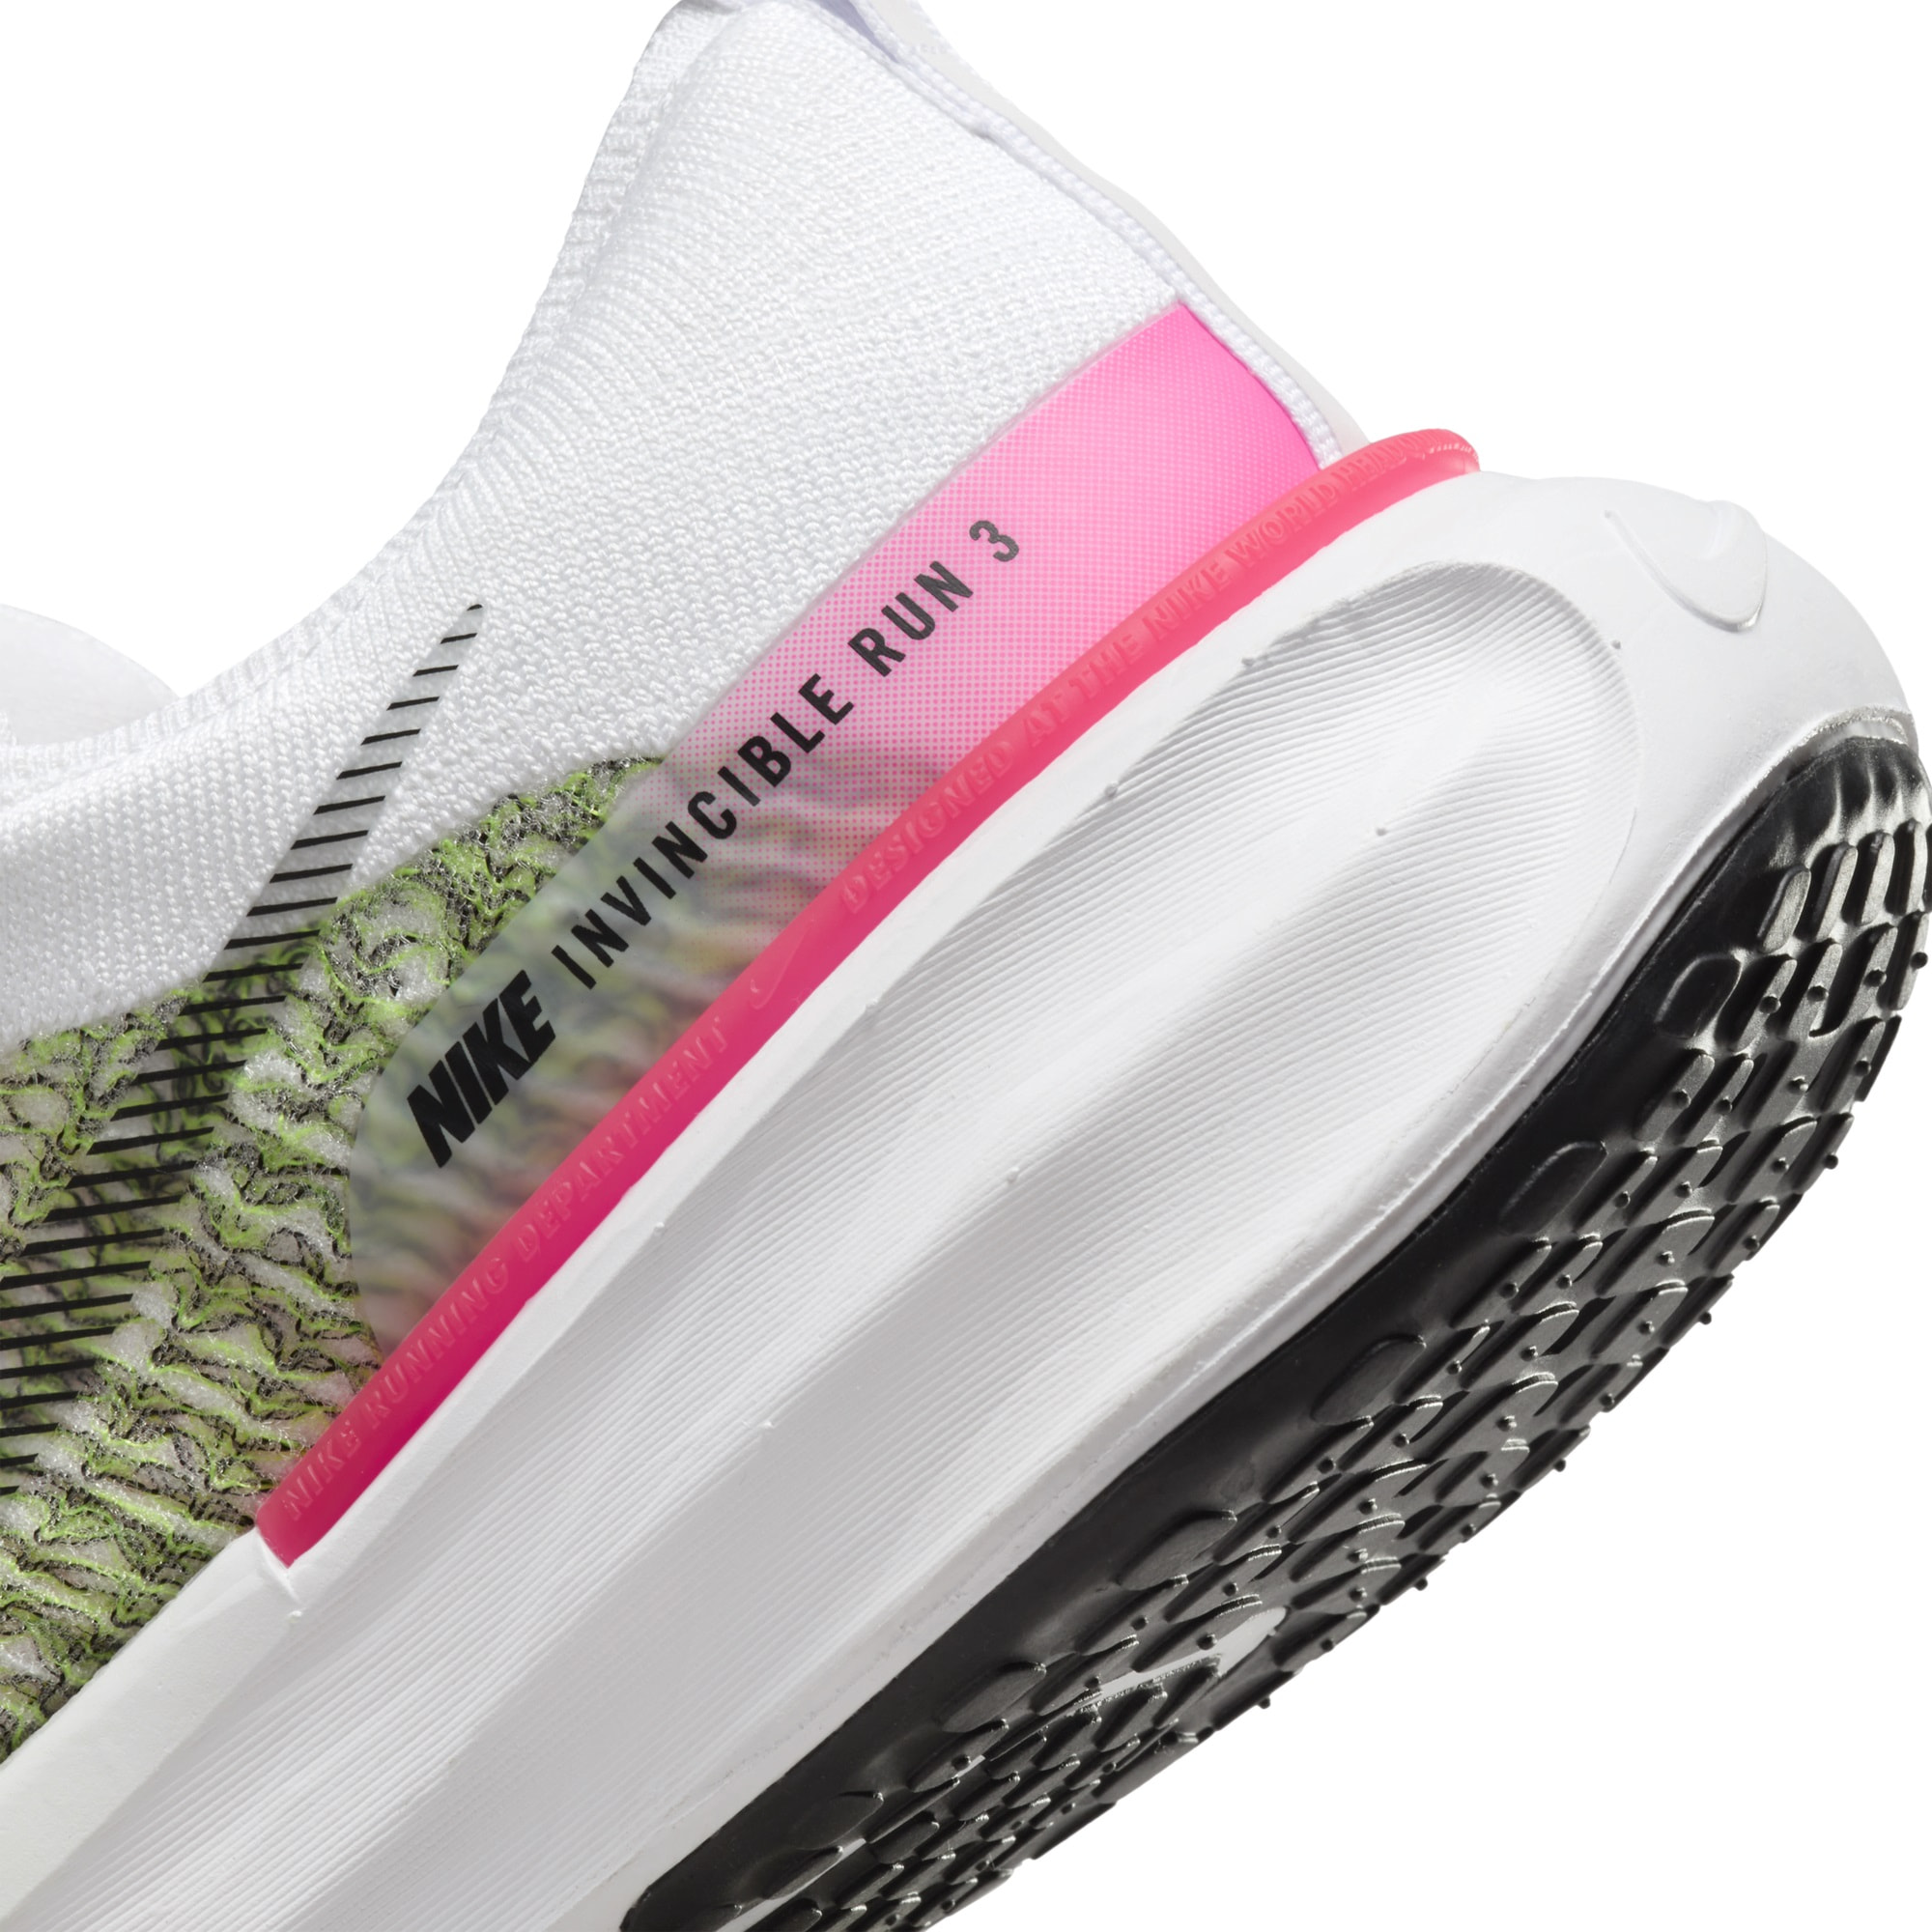 GIÀY CHAY BỘ NIKE NỮ WOMENS ZOOMX INVINCIBLE 3 ROAD RUNNING SHOES WHITE VOLT HYPER PINK FN6821-100 2